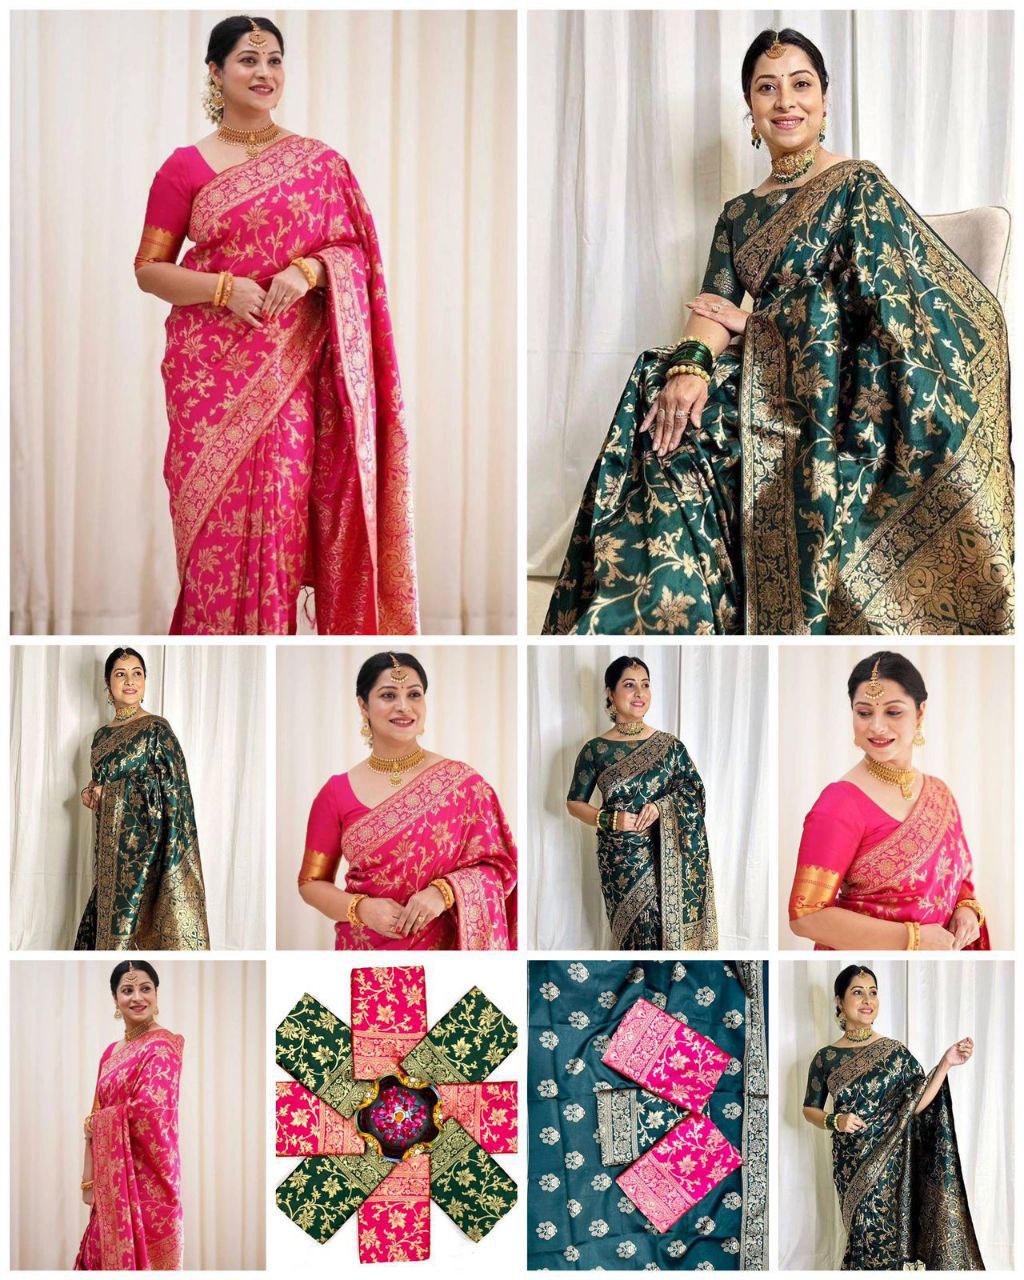 Indulge in Elegance with our Exquisite Soft Lichi Silk Sarees!